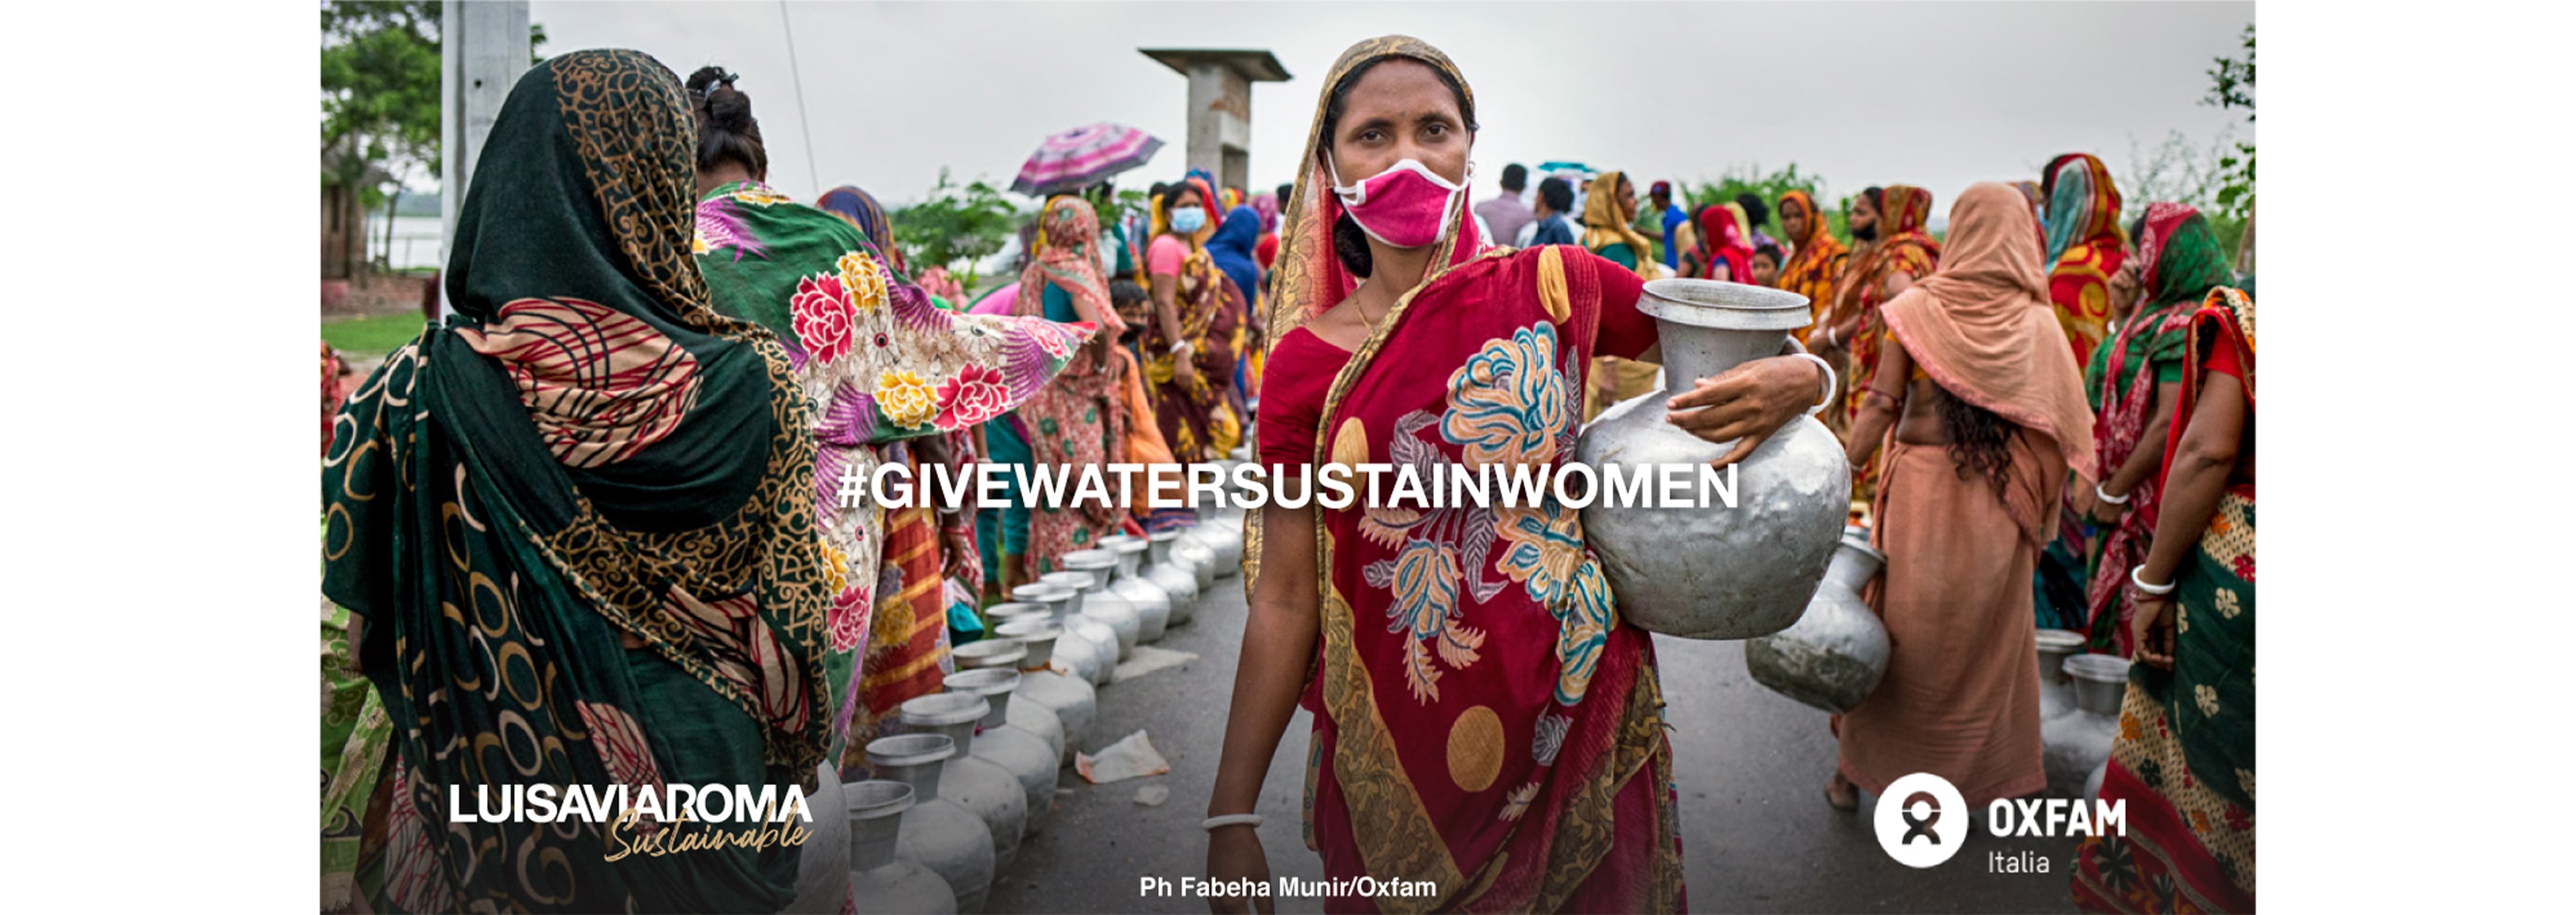 LVRSustainable & Oxfam Italy for Give Water, Sustain Women: Dorothyのストーリー